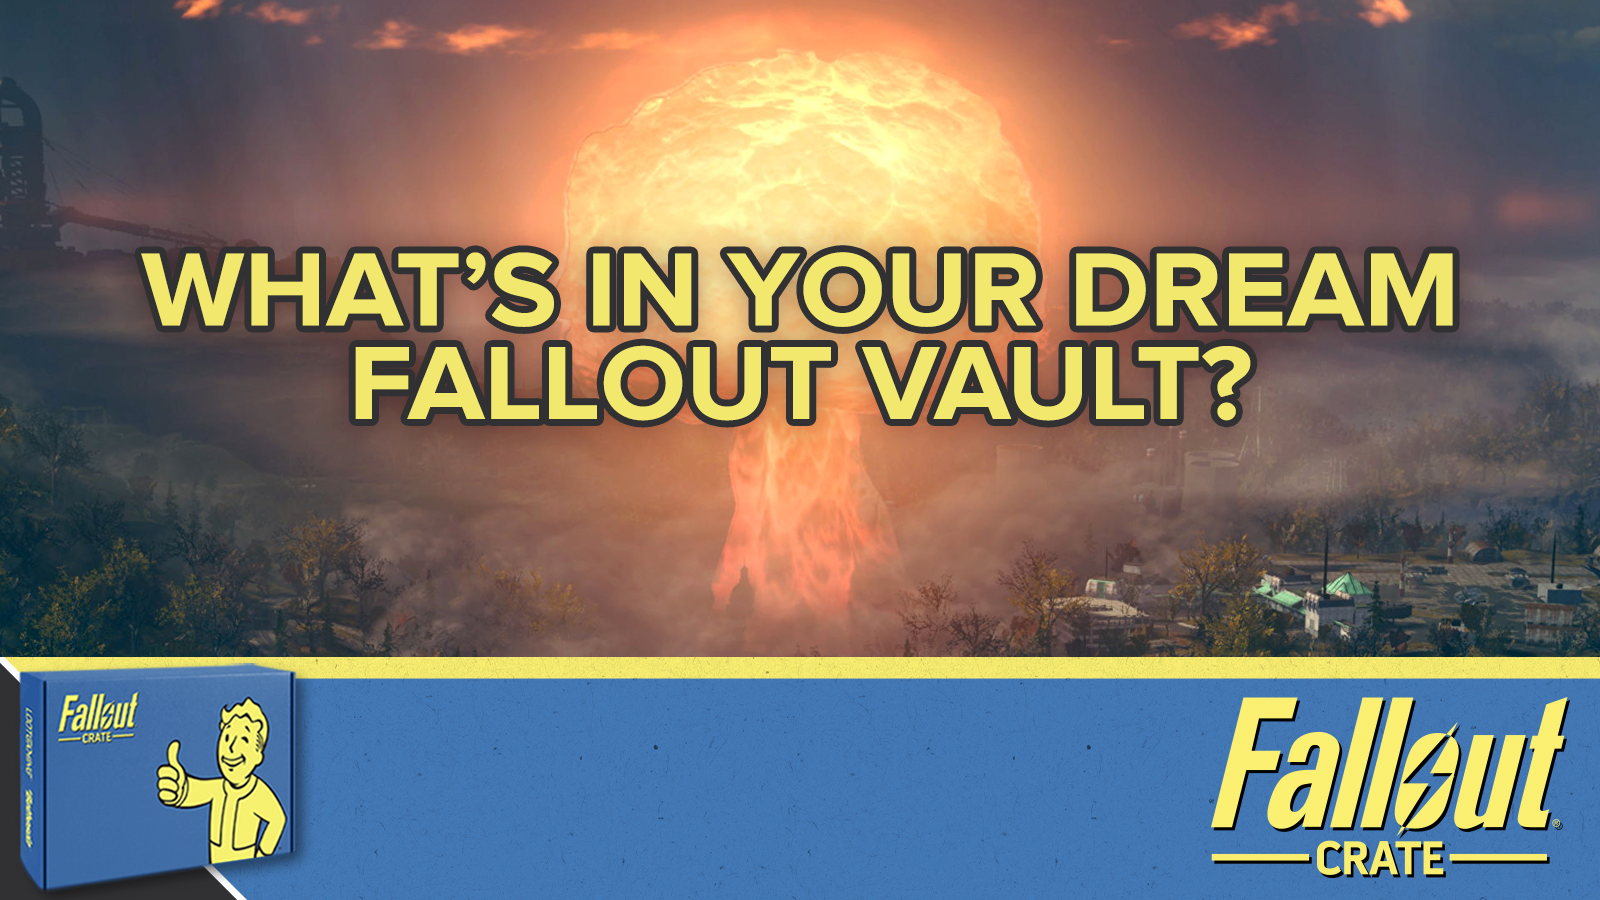 The Winners of Our Fallout Bomb Drop Day Contest